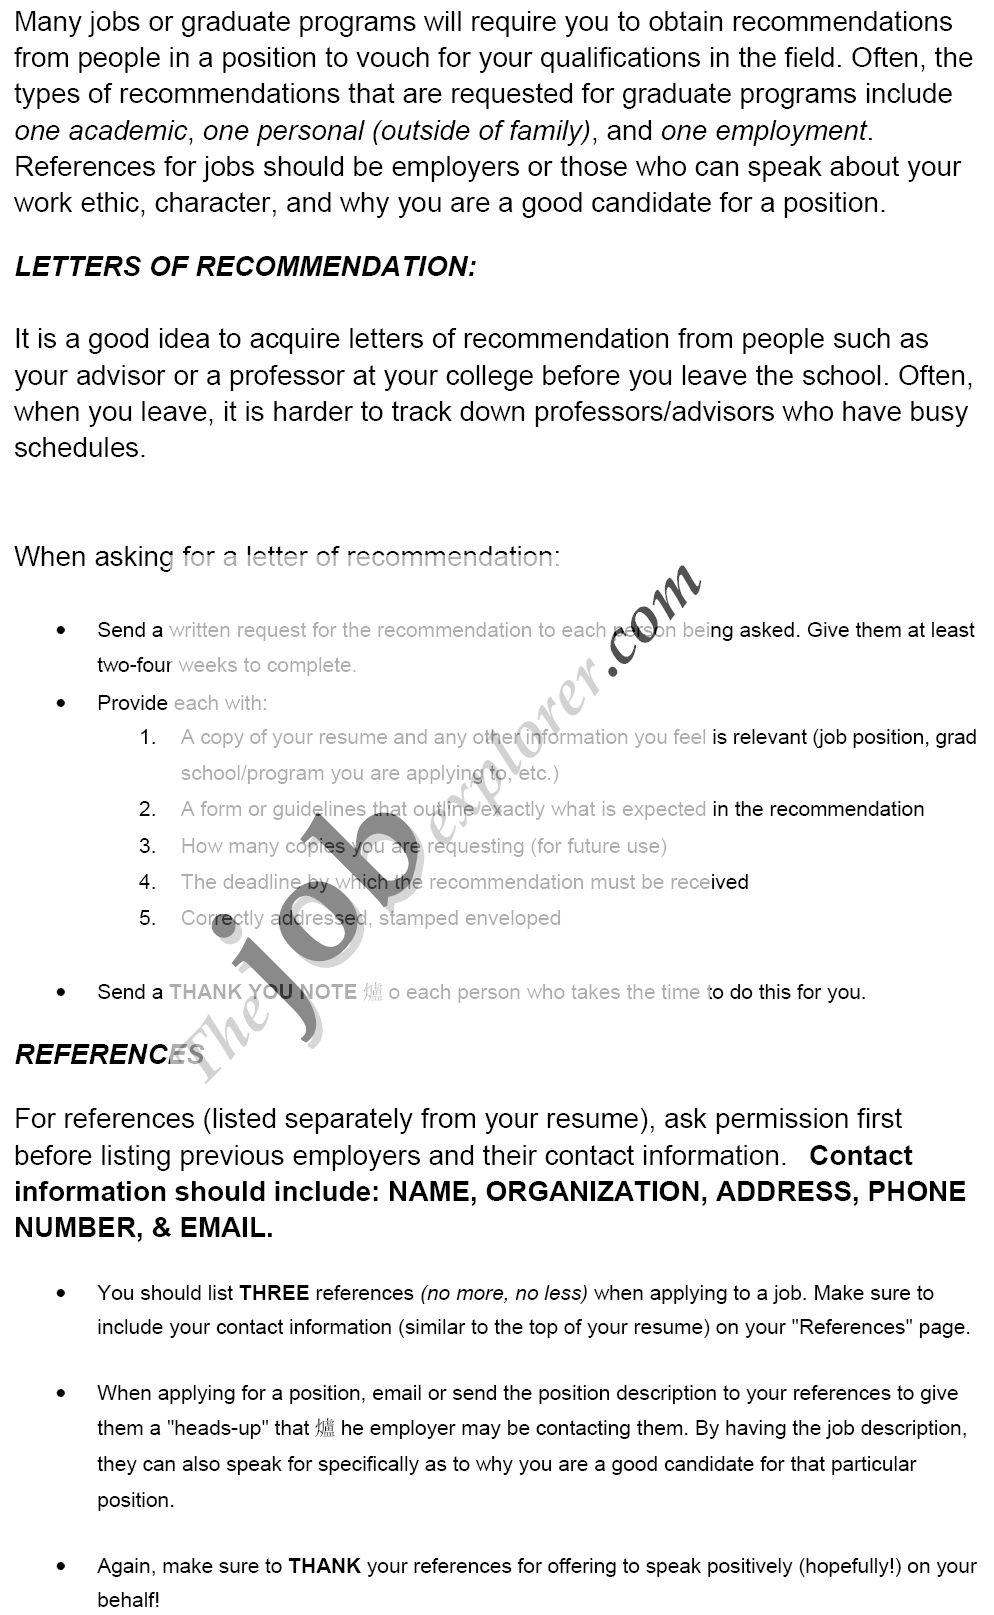 College Recommendation Letter Template From Teachers from www.thejobexplorer.com